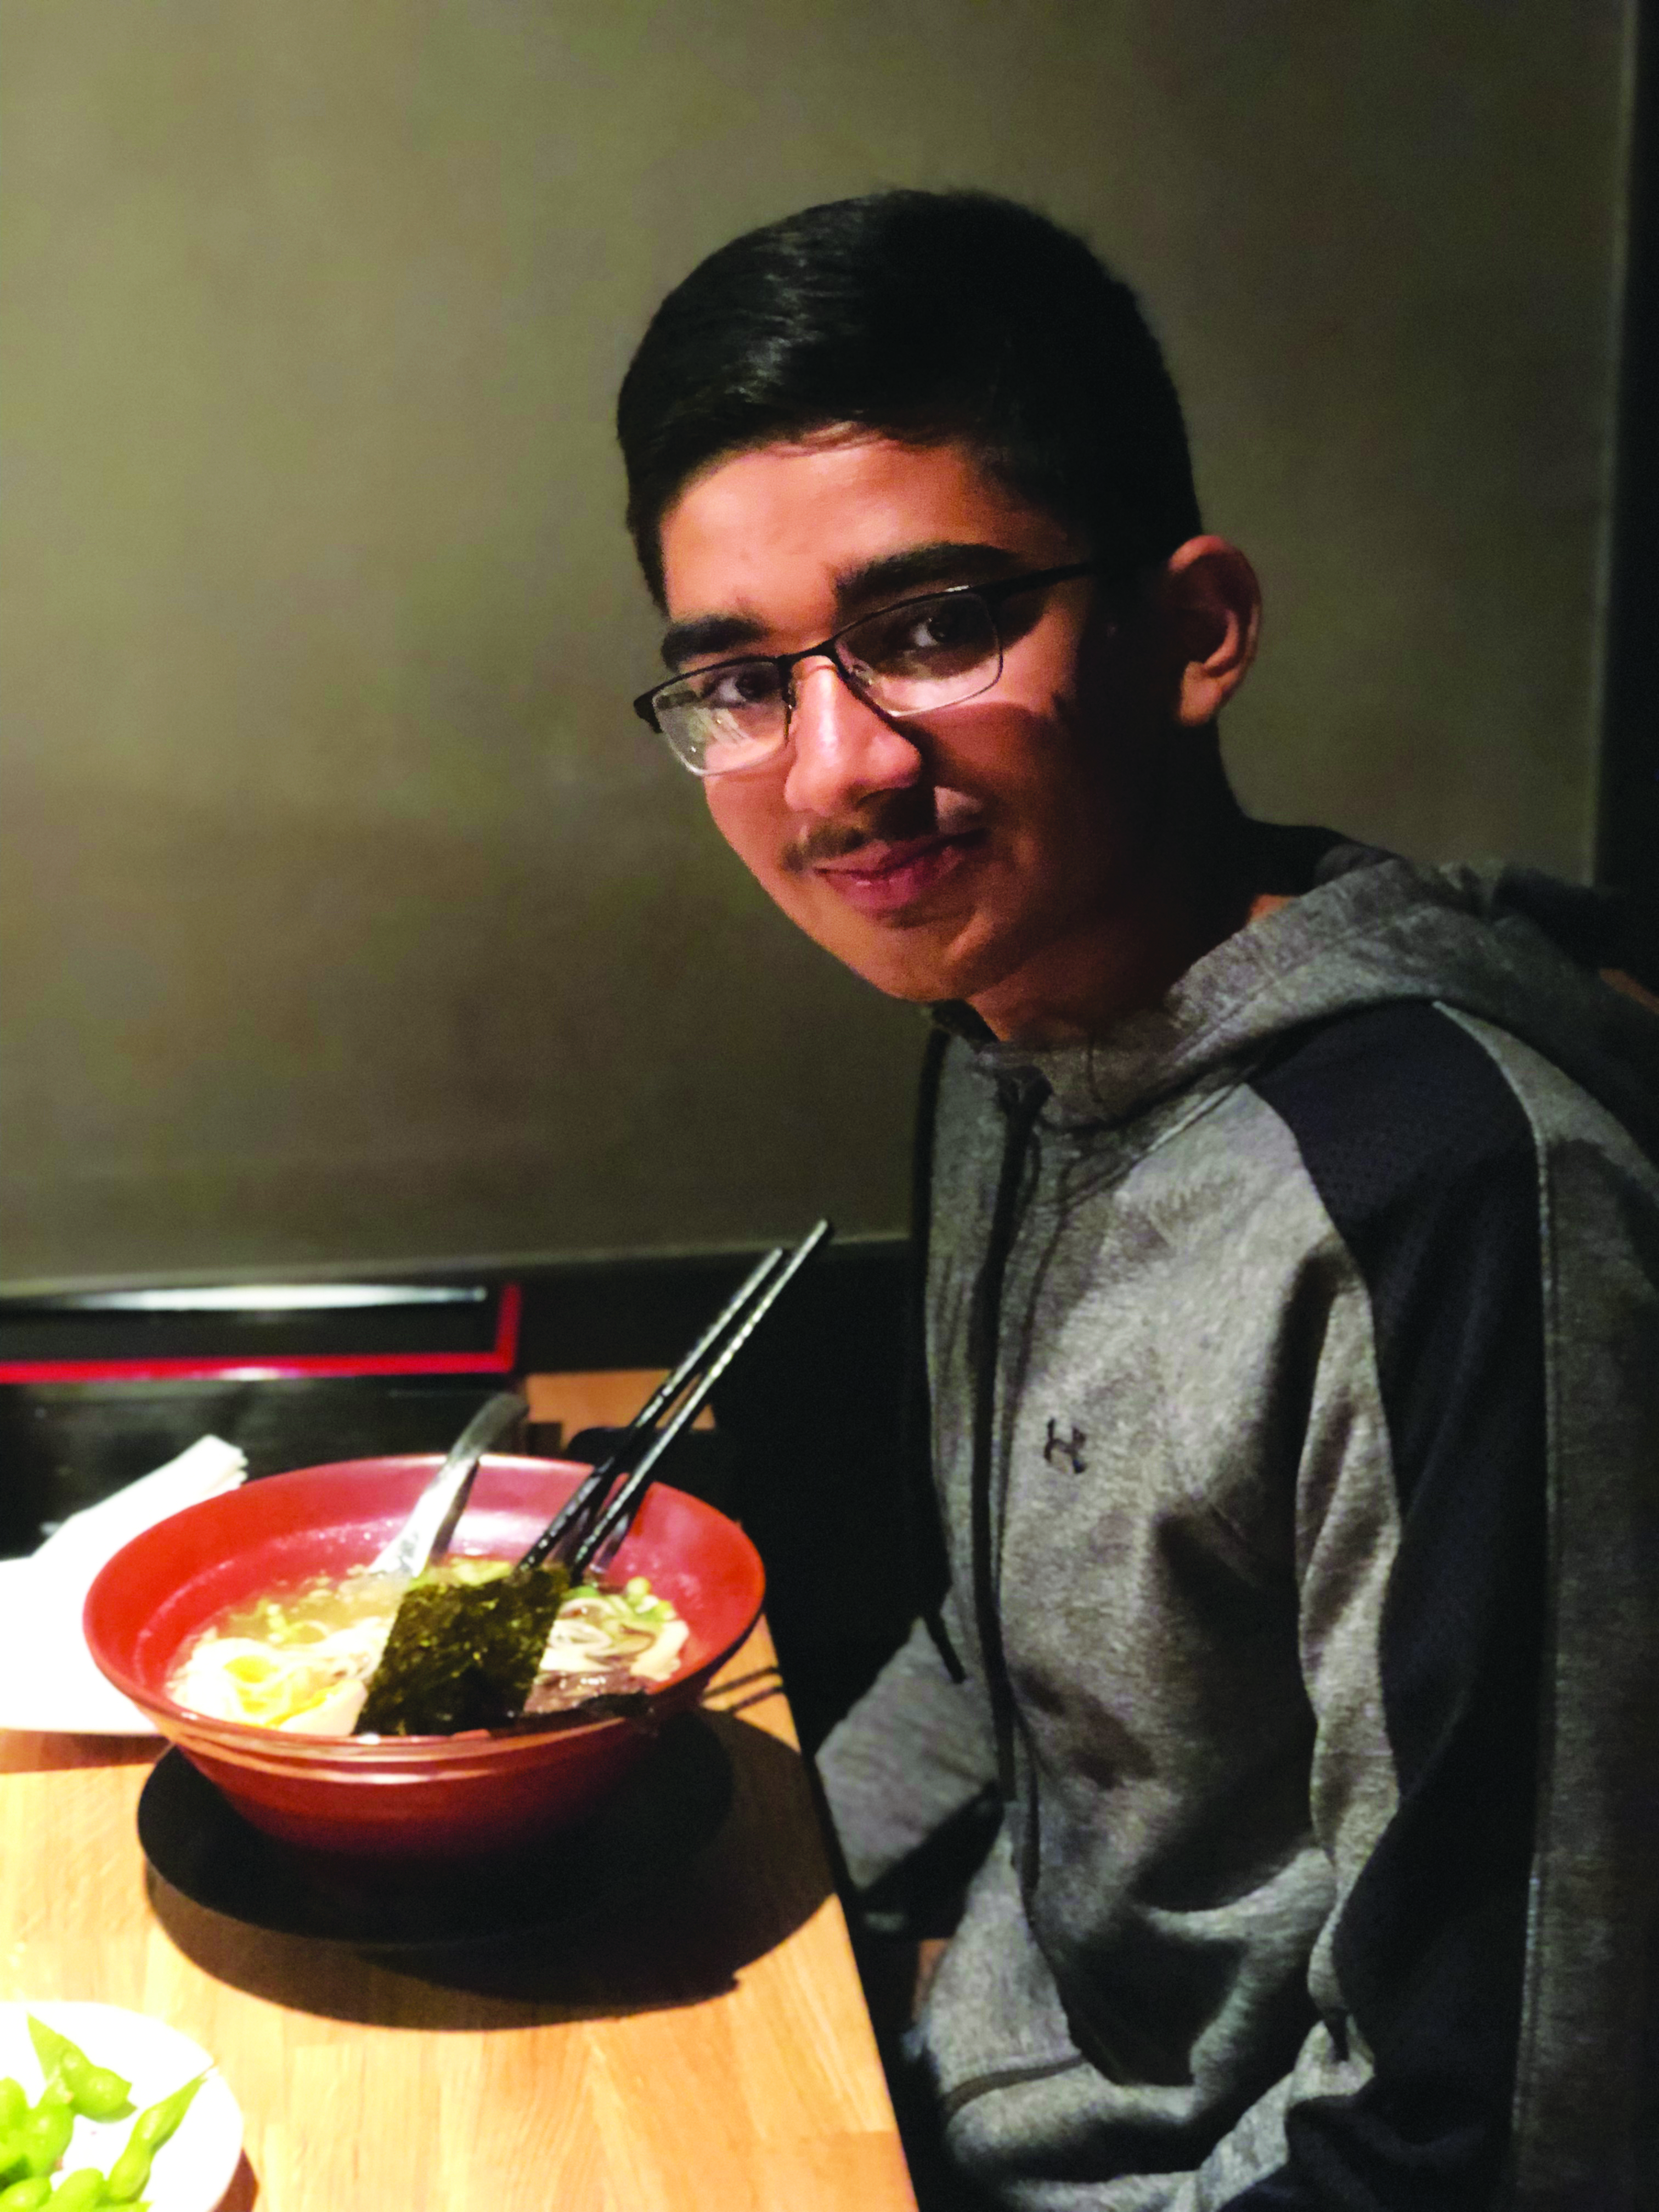 Picture of the reporter, Vedant, with his Vegan Ramen.